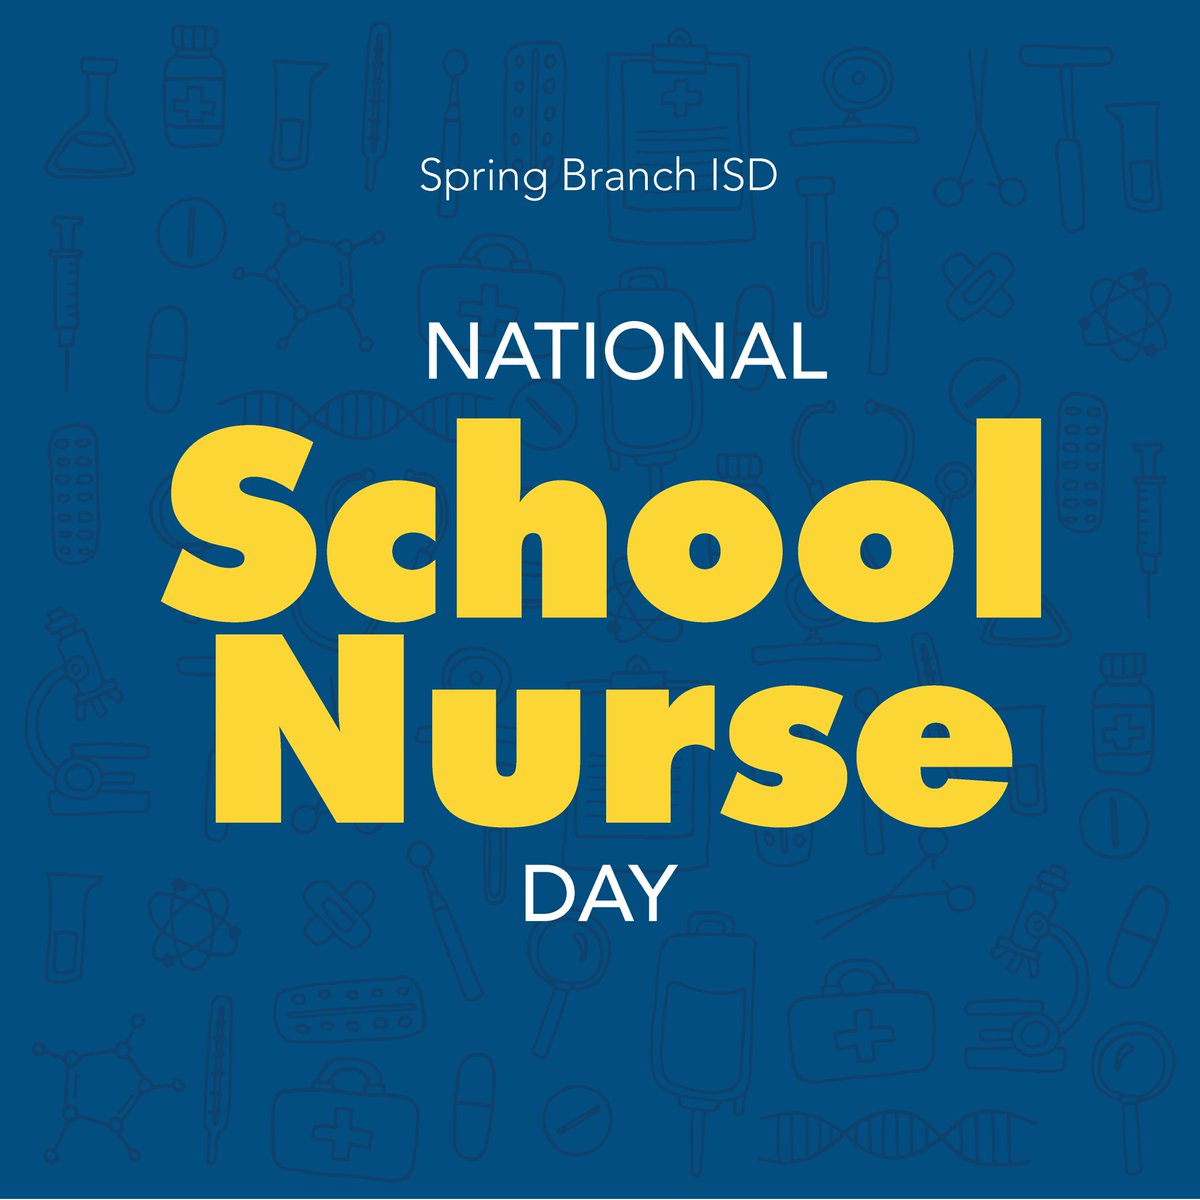 Today, we honor the dedicated nurses of SBISD! Your care, compassion and commitment keep our students healthy and thriving. Thank you for your tireless efforts, especially on National School Nurse Day! #EveryChild